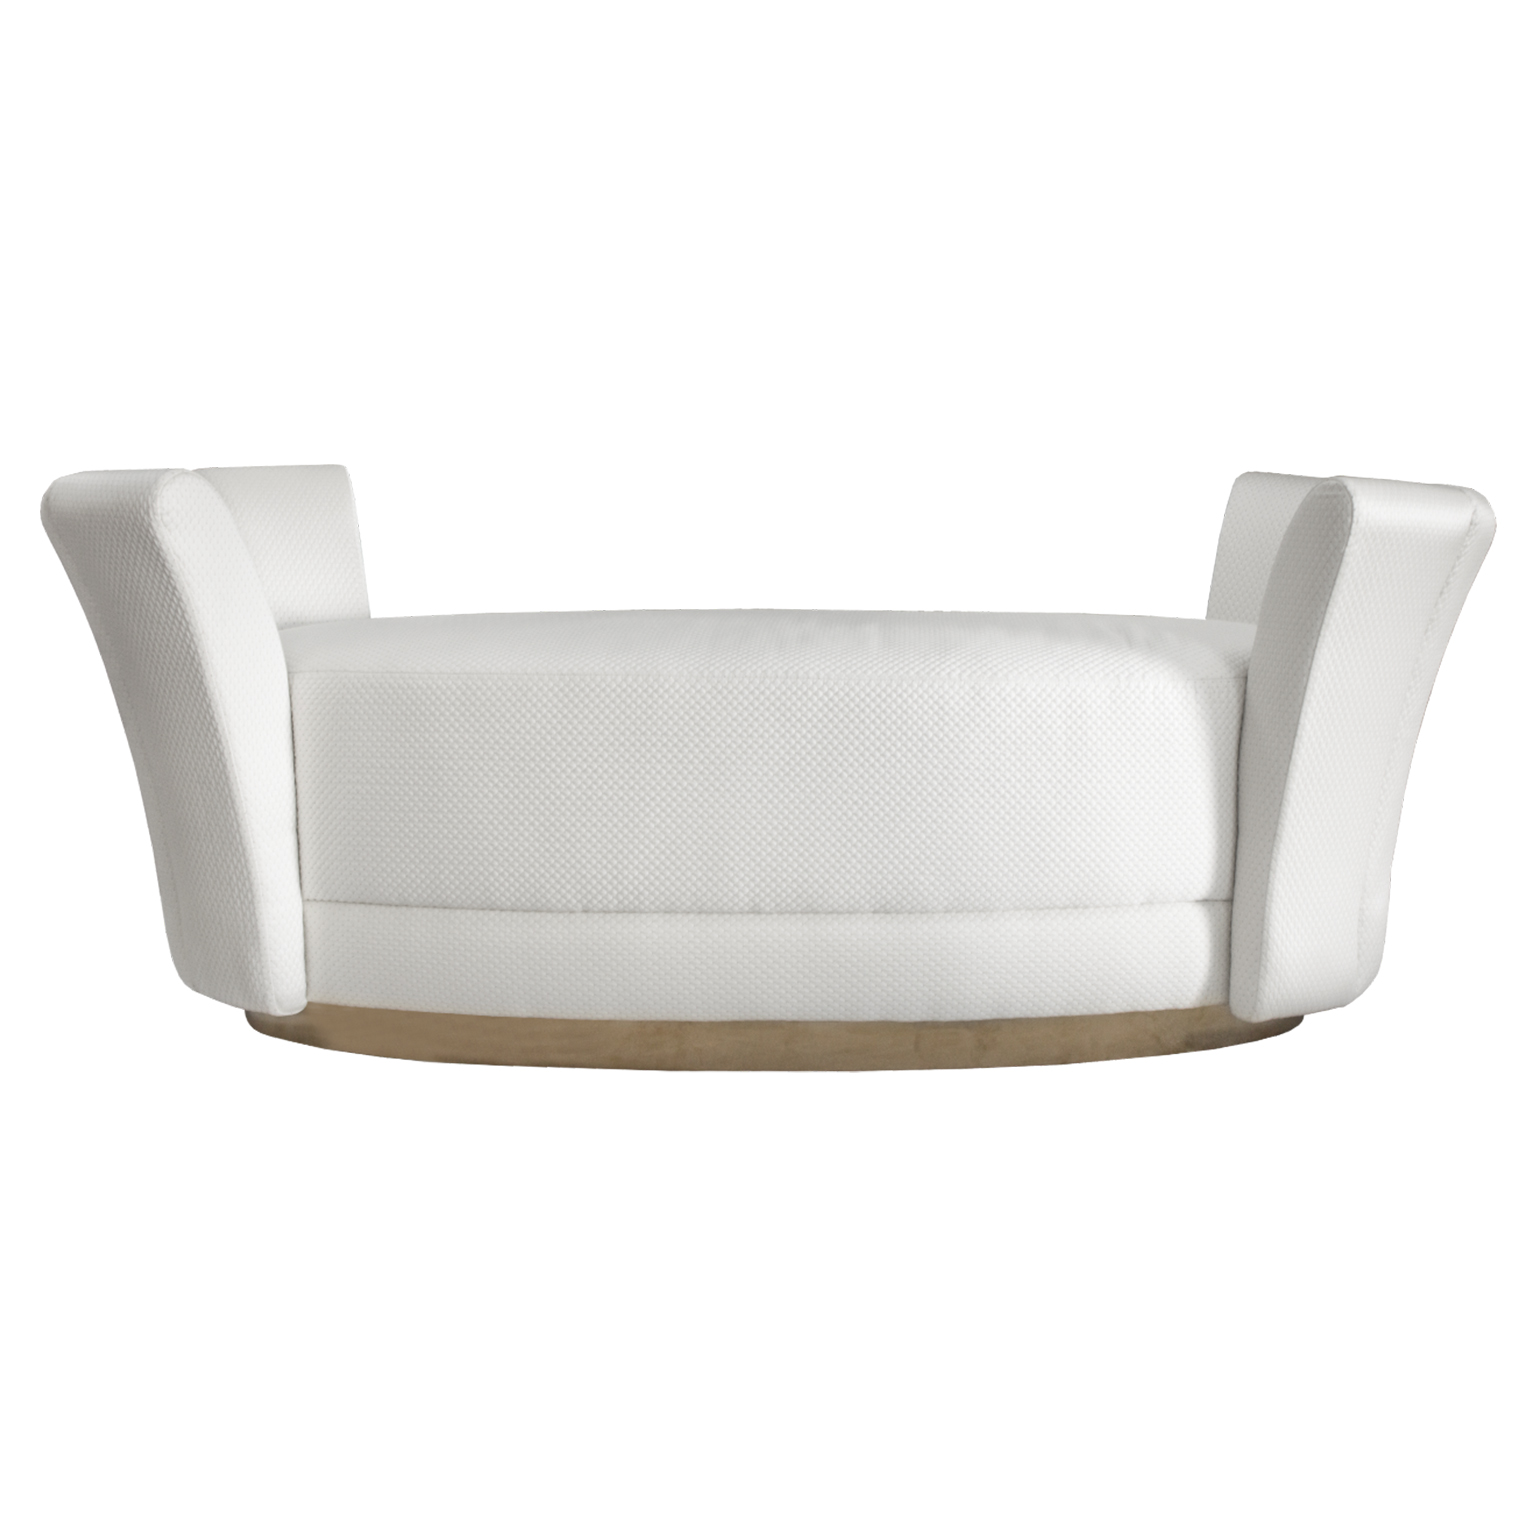 Oval Bench/Daybed with curved scalloped sides, upholstered body and smoked brass recessed base